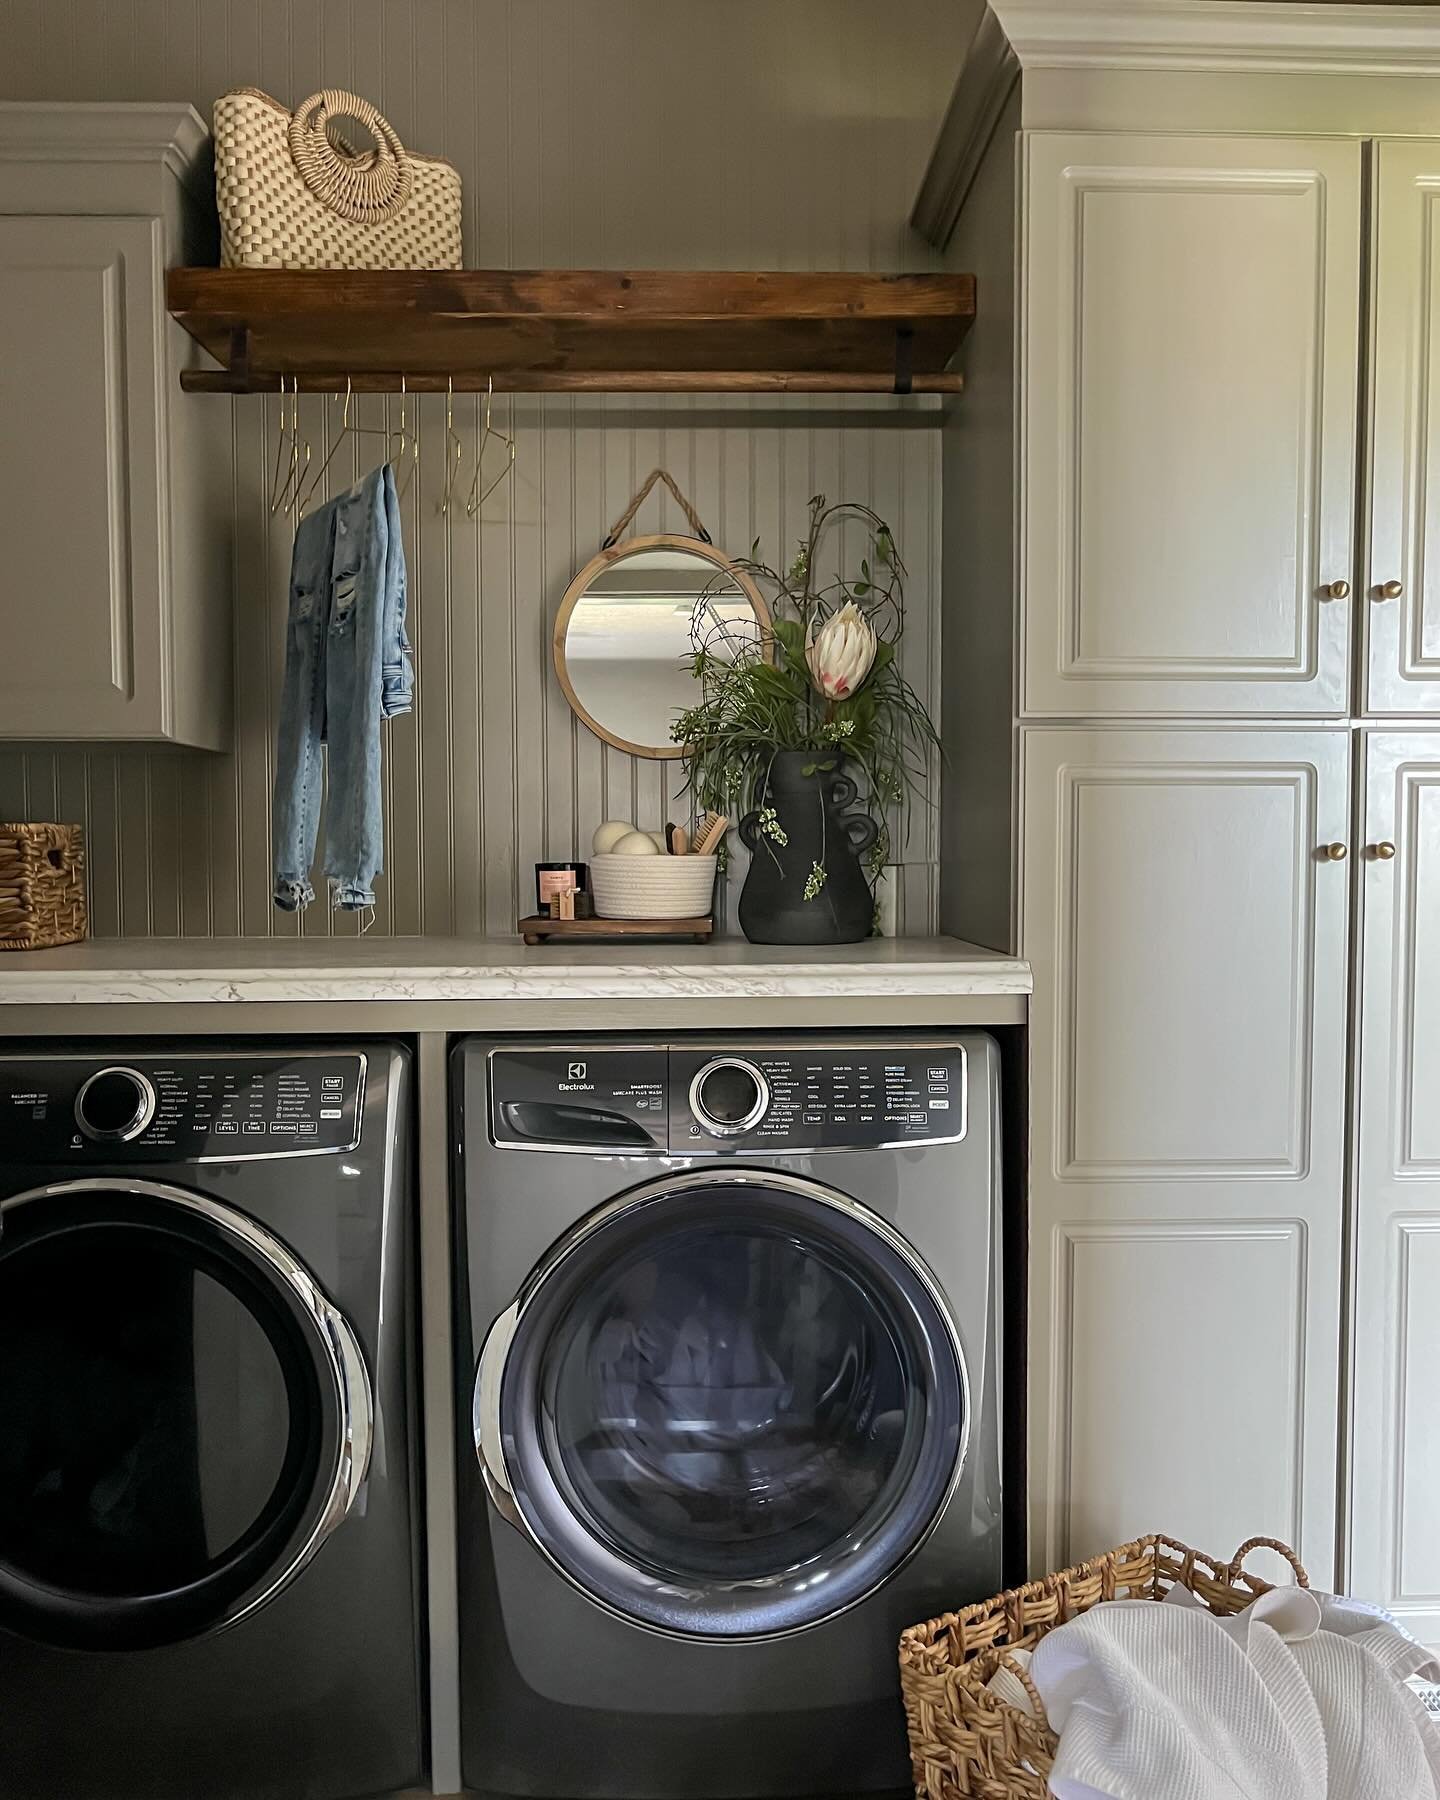 See what magic a little paint can do?
This laundry room began as nothing remarkable, but through the simple acts of removing a few cabinets and introducing beadboard, a hanging rod, charming hardware, and wall-to-wall countertops, it&rsquo;s a whole 